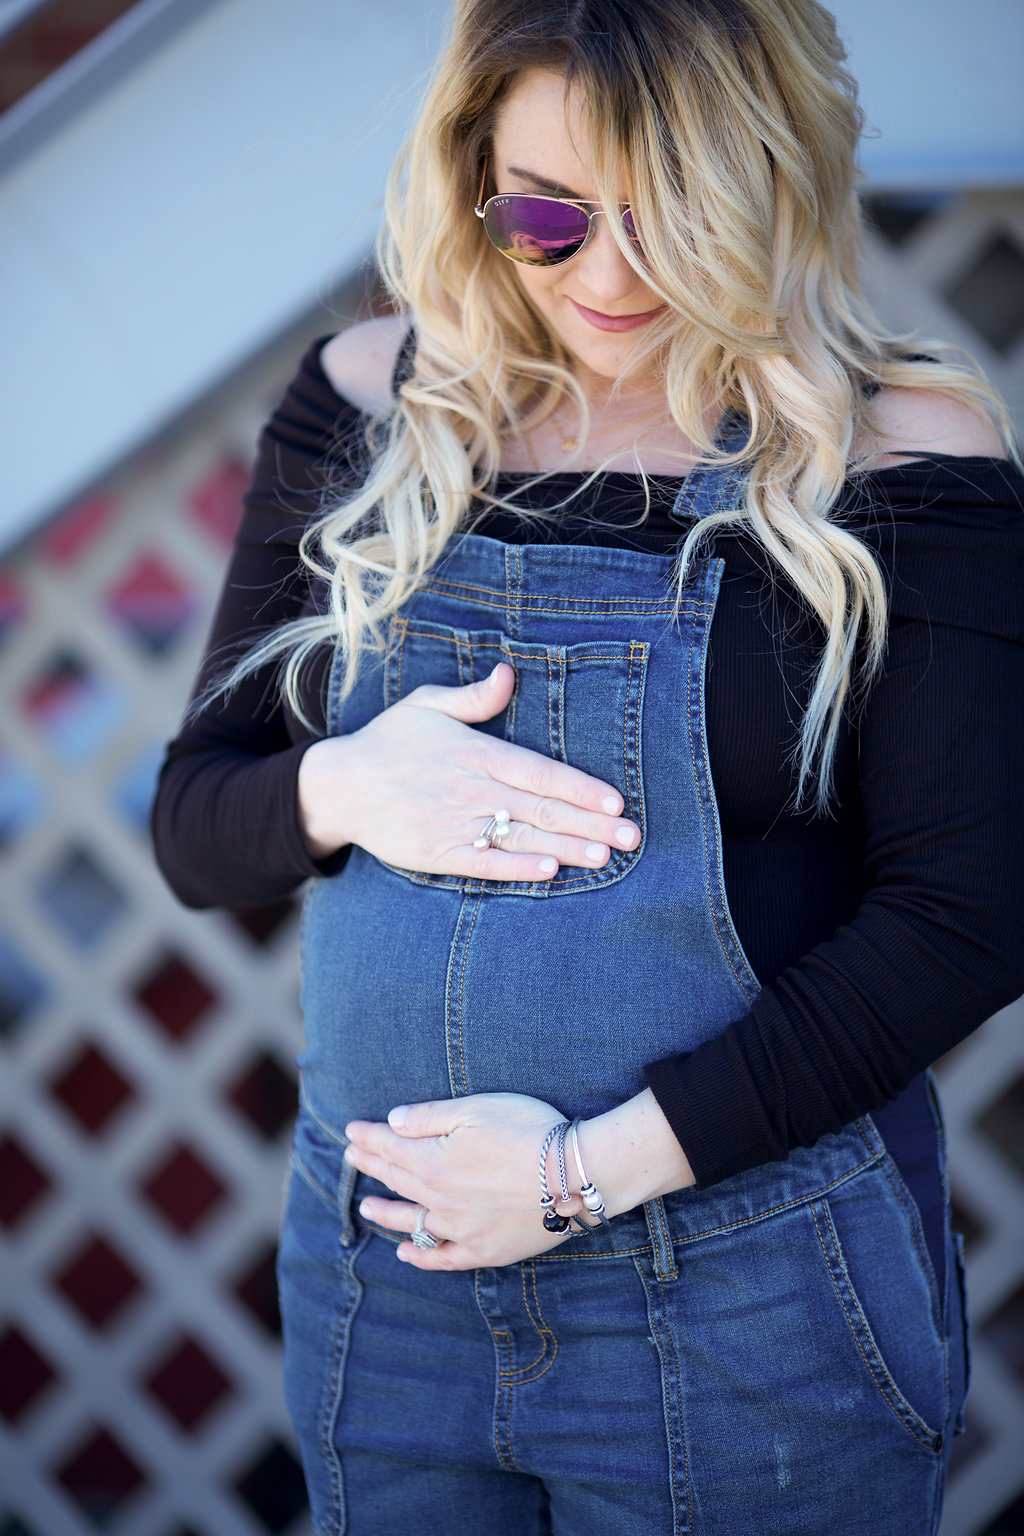 Bumpdate: 21 weeks pregnant and loving these maternity overalls! 